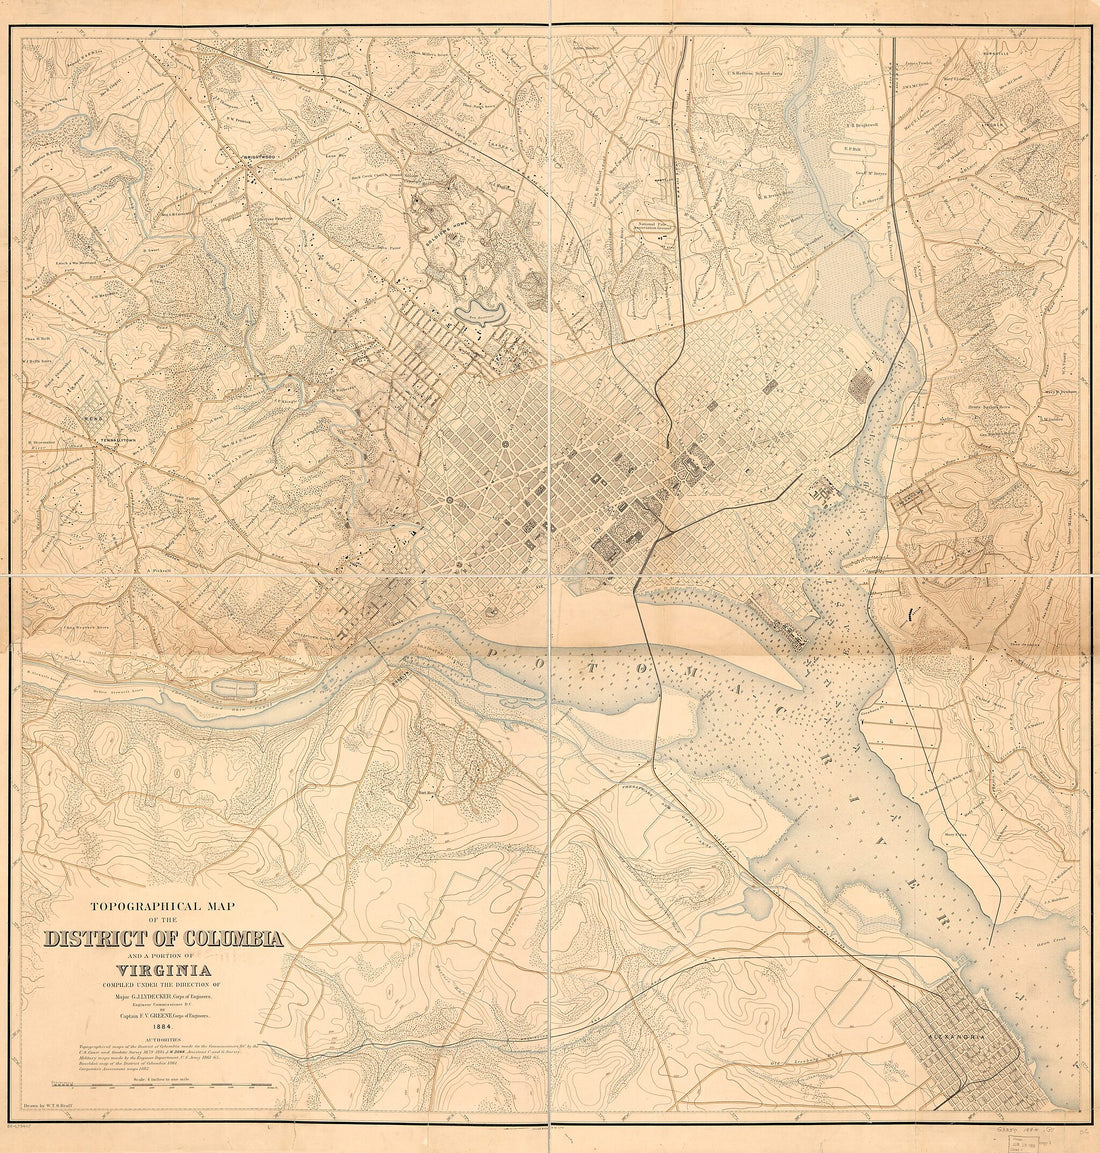 This old map of Topographical Map of the District of Columbia and a Portion of Virginia from 1884 was created by William T. O. Bruff, F. V. (Francis Vinton) Greene, G. J. (Garrett J.) Lydecker,  Office of the Engineer Commissioner D.C.,  United States. A